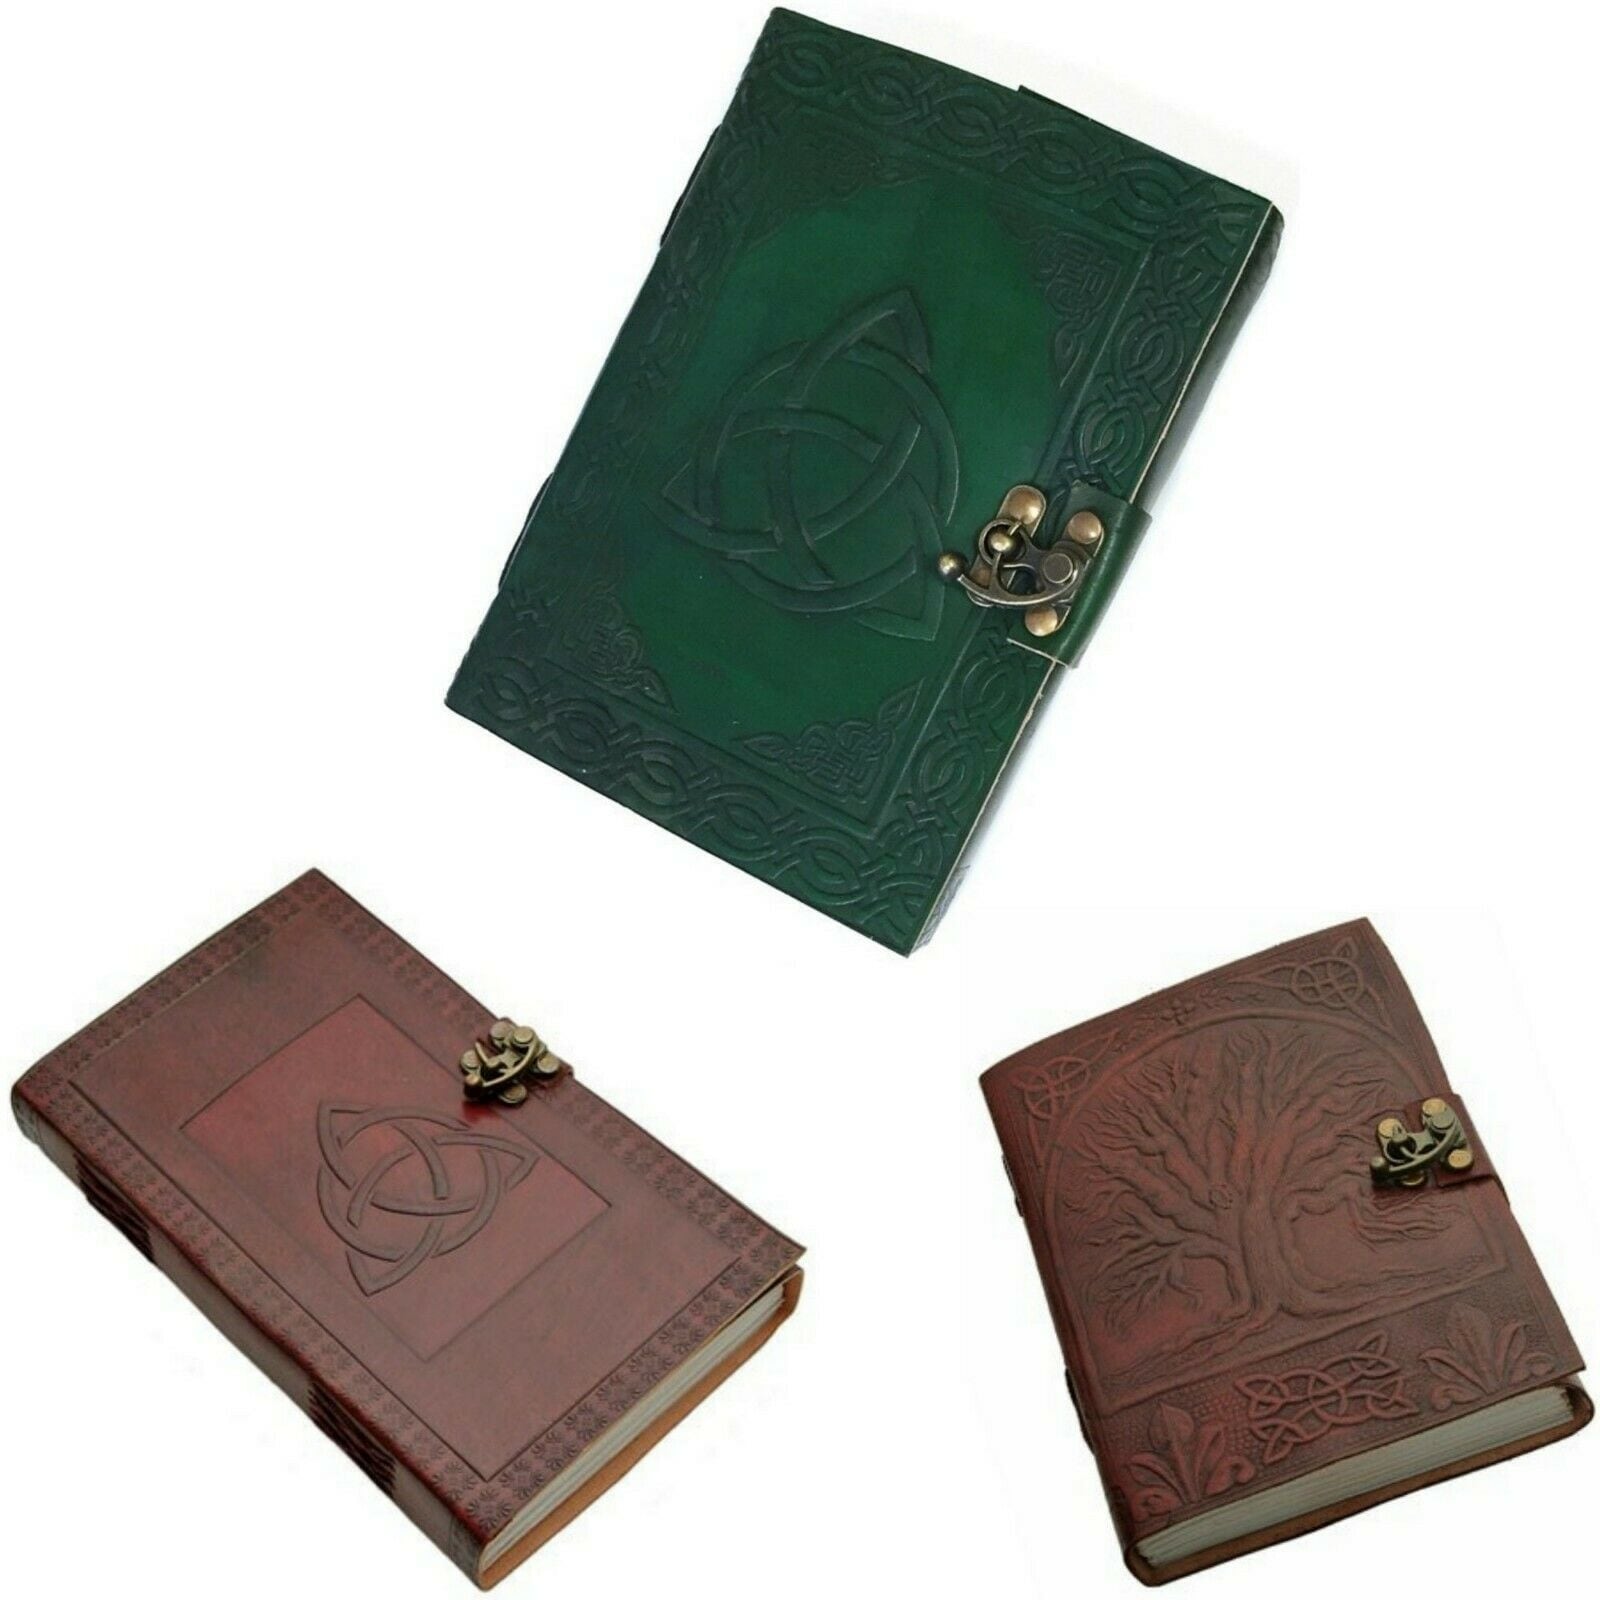 Tree Of Life Handmade Leather Journal Embossed High Quality Diary